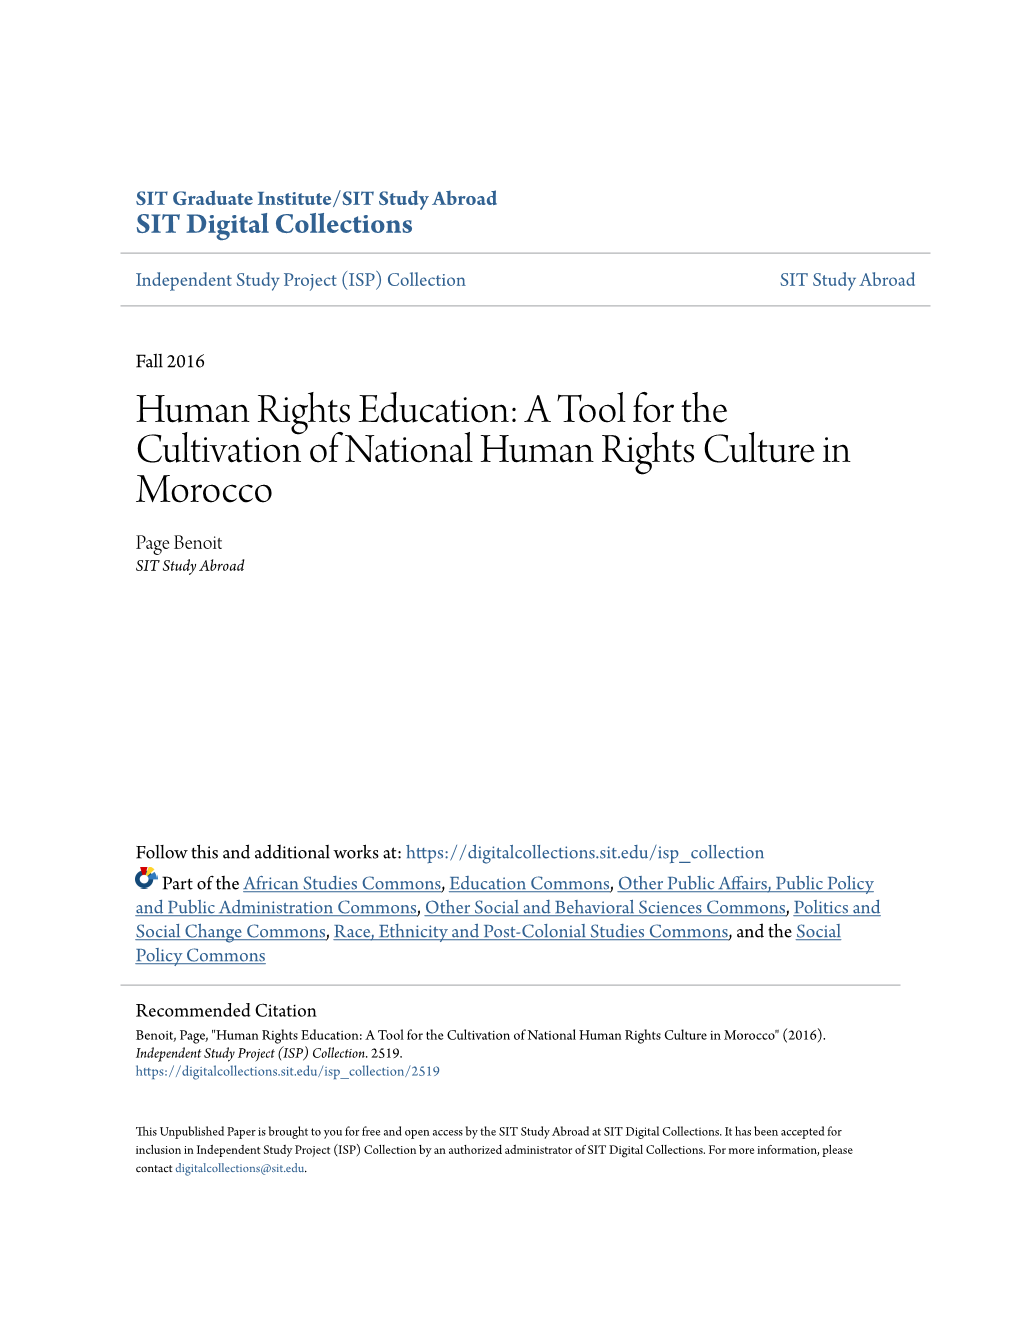 A Tool for the Cultivation of National Human Rights Culture in Morocco Page Benoit SIT Study Abroad